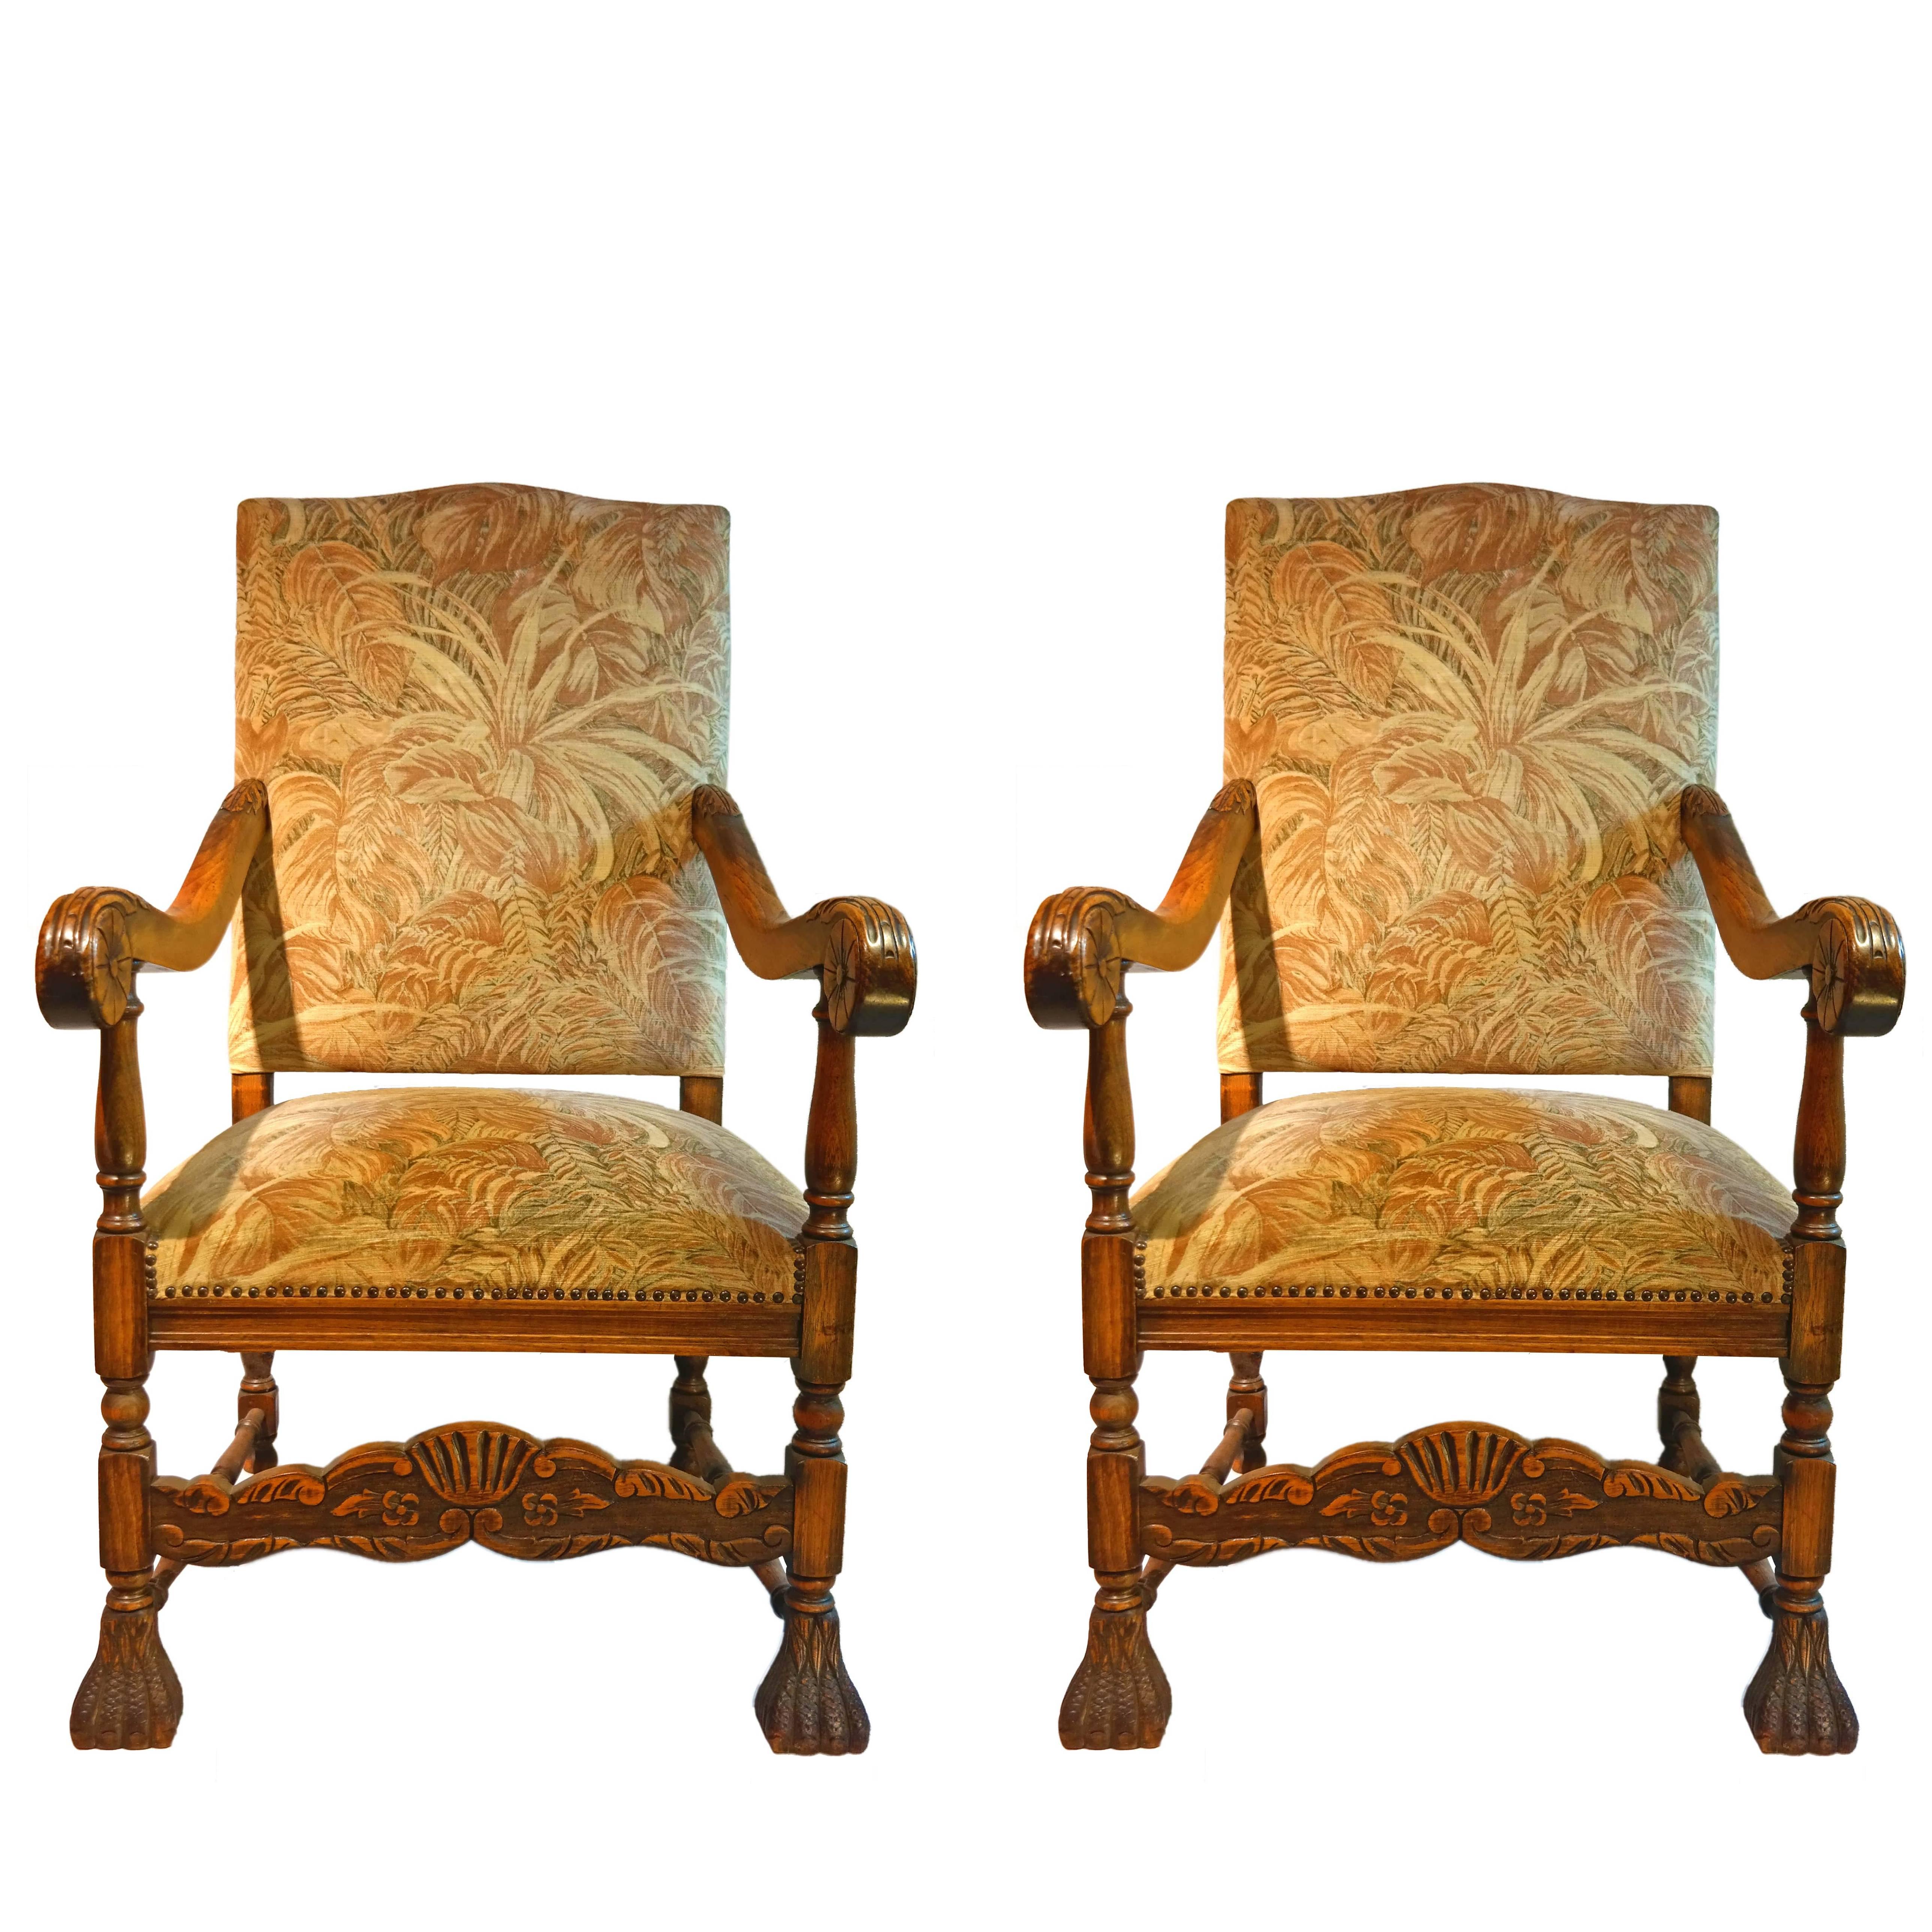 Pair of Early 20th Century English High Back Carved Elm Armchairs